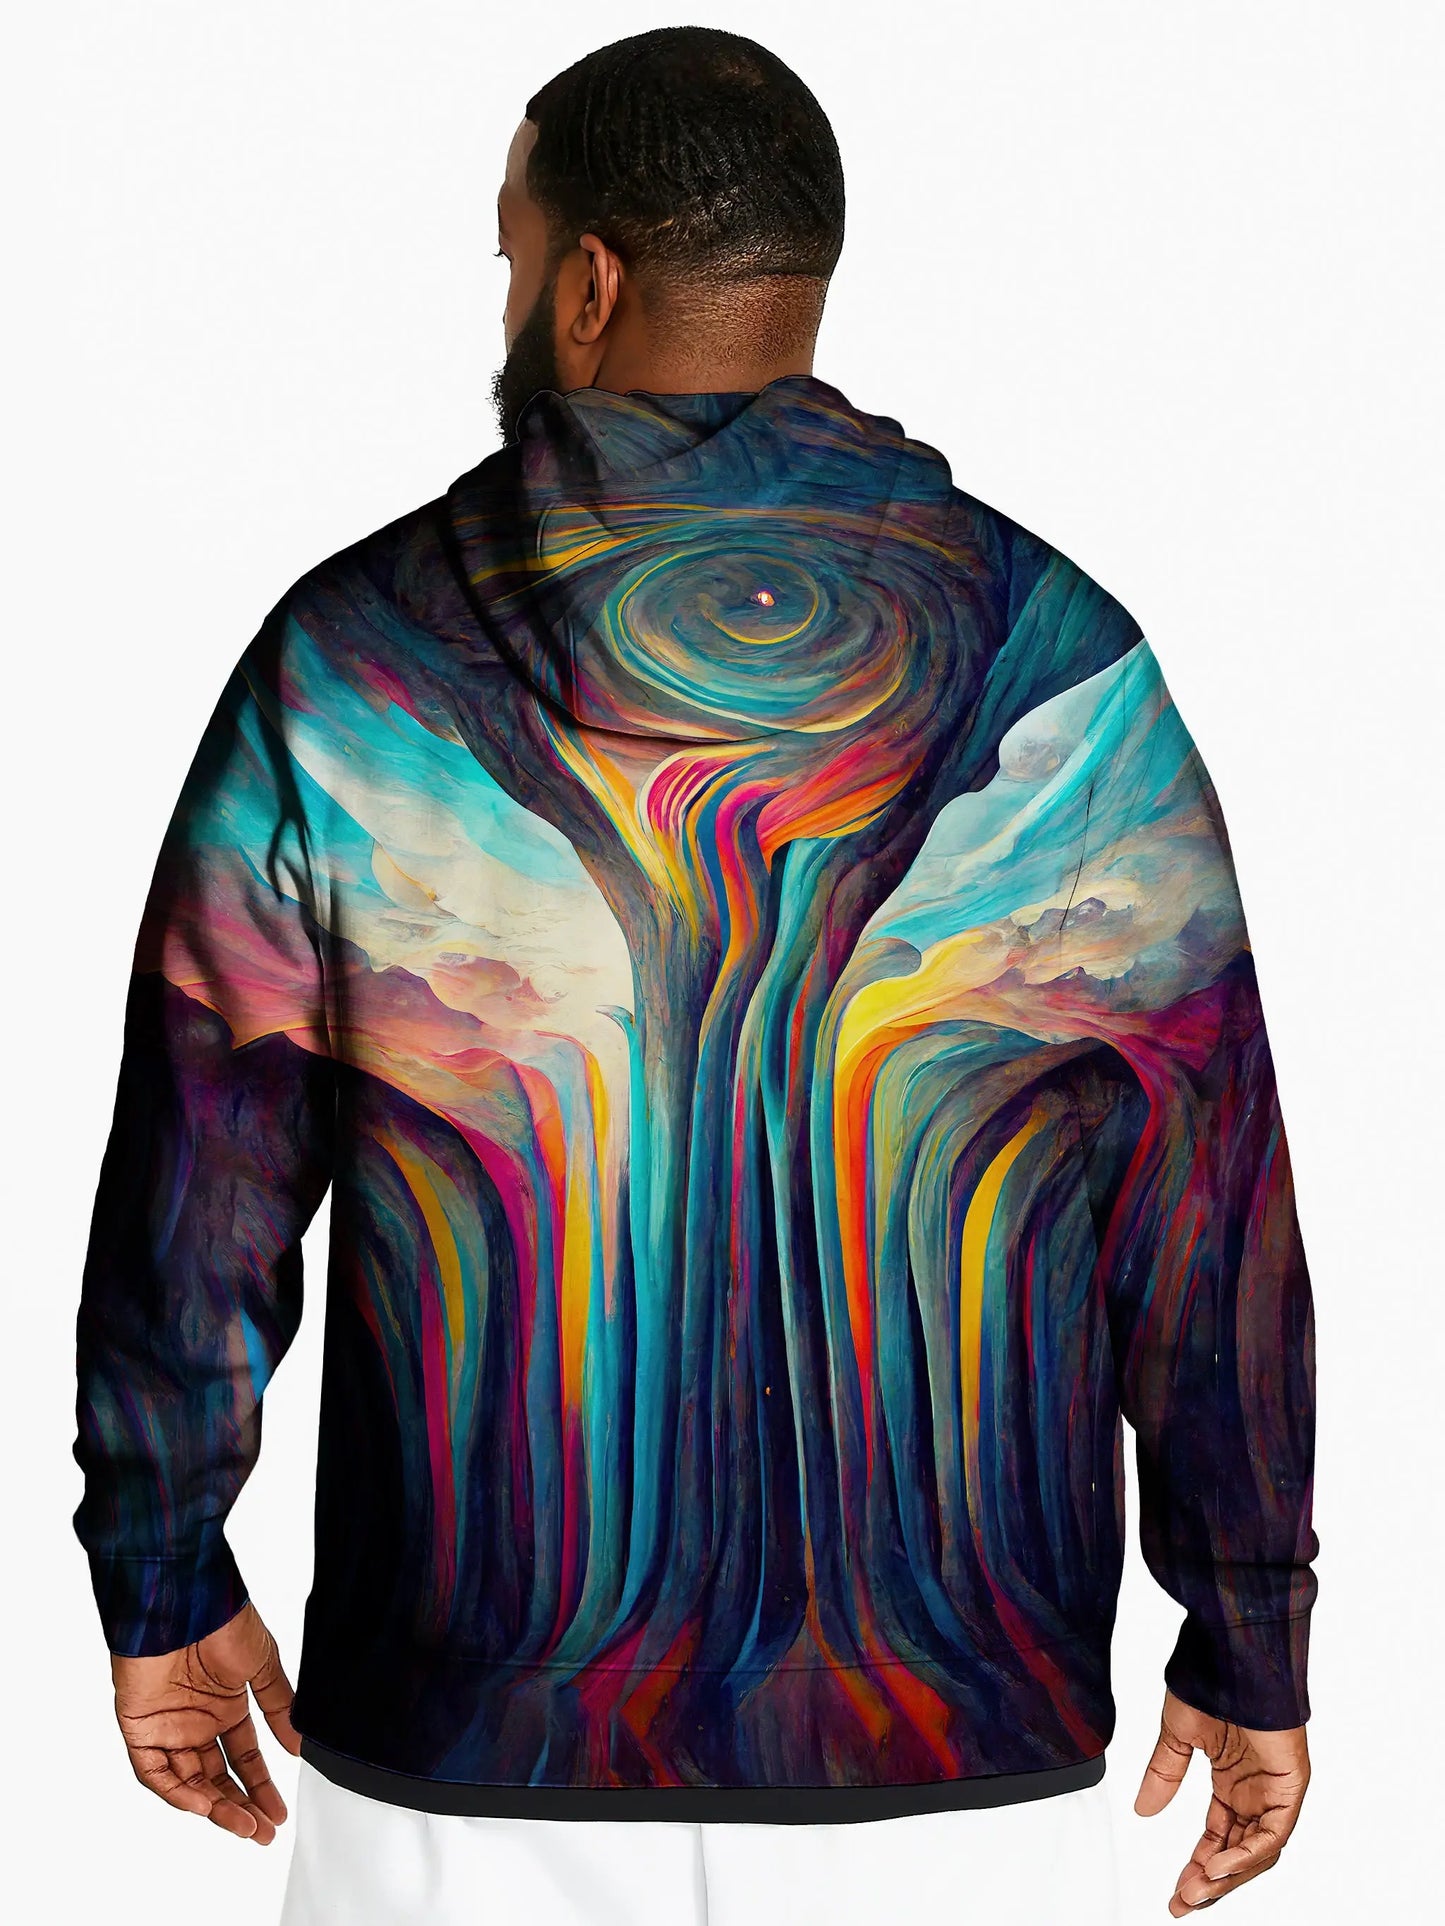 Creative Champion Unisex Pullover Hoodie - EDM Festival Clothing - Boogie Threads